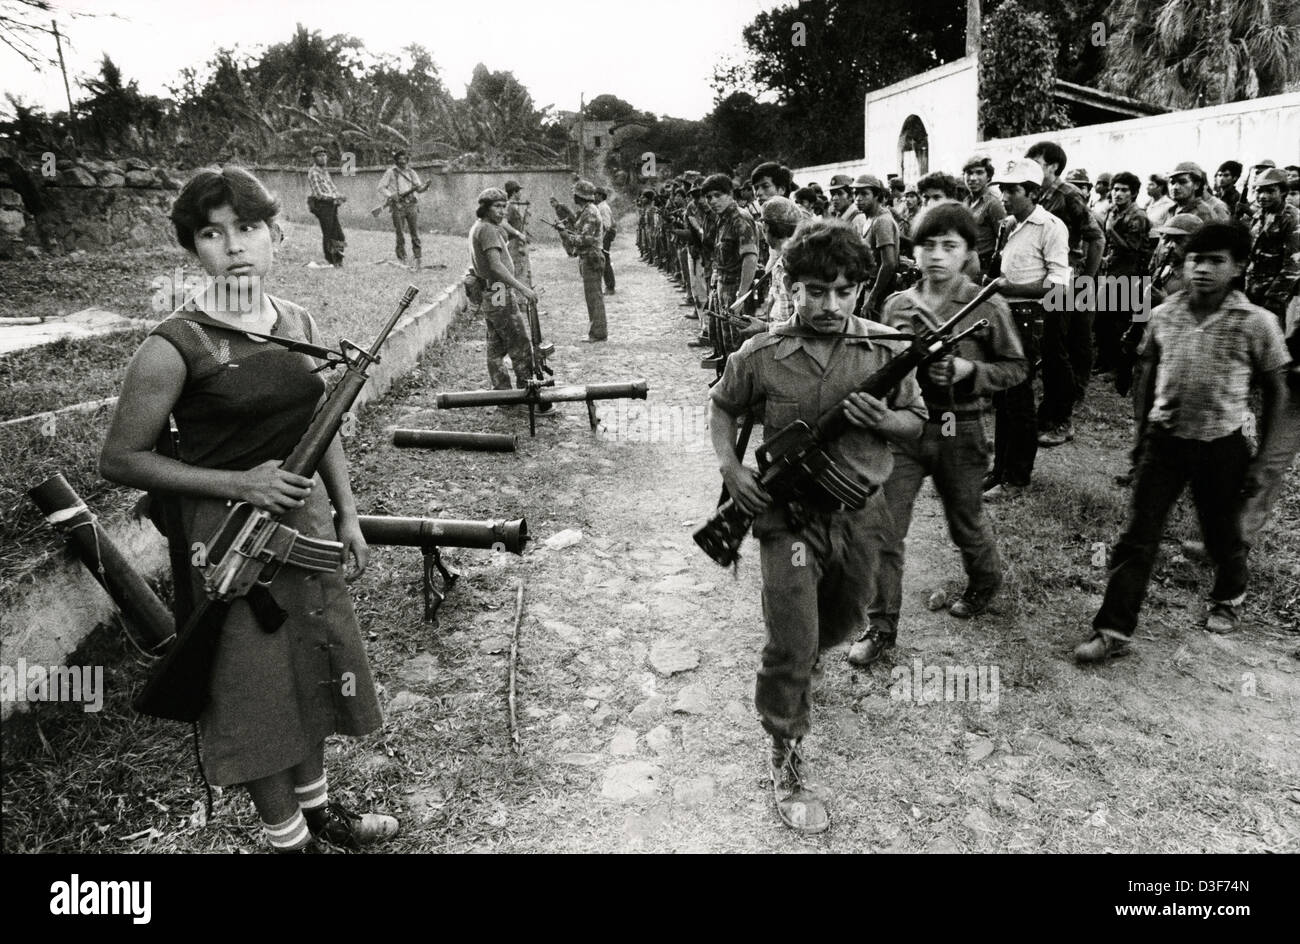 TENANCINGO,  EL SALVADOR, FEB 1984: - Within the FPL Guerilla's Zones of Control - Some of the 1,000 guerrillas that had been gathered in preparation for a guerilla offensive, less than 40 miles from the capital, fall out after parade.   Photo by Mike Goldwater Stock Photo